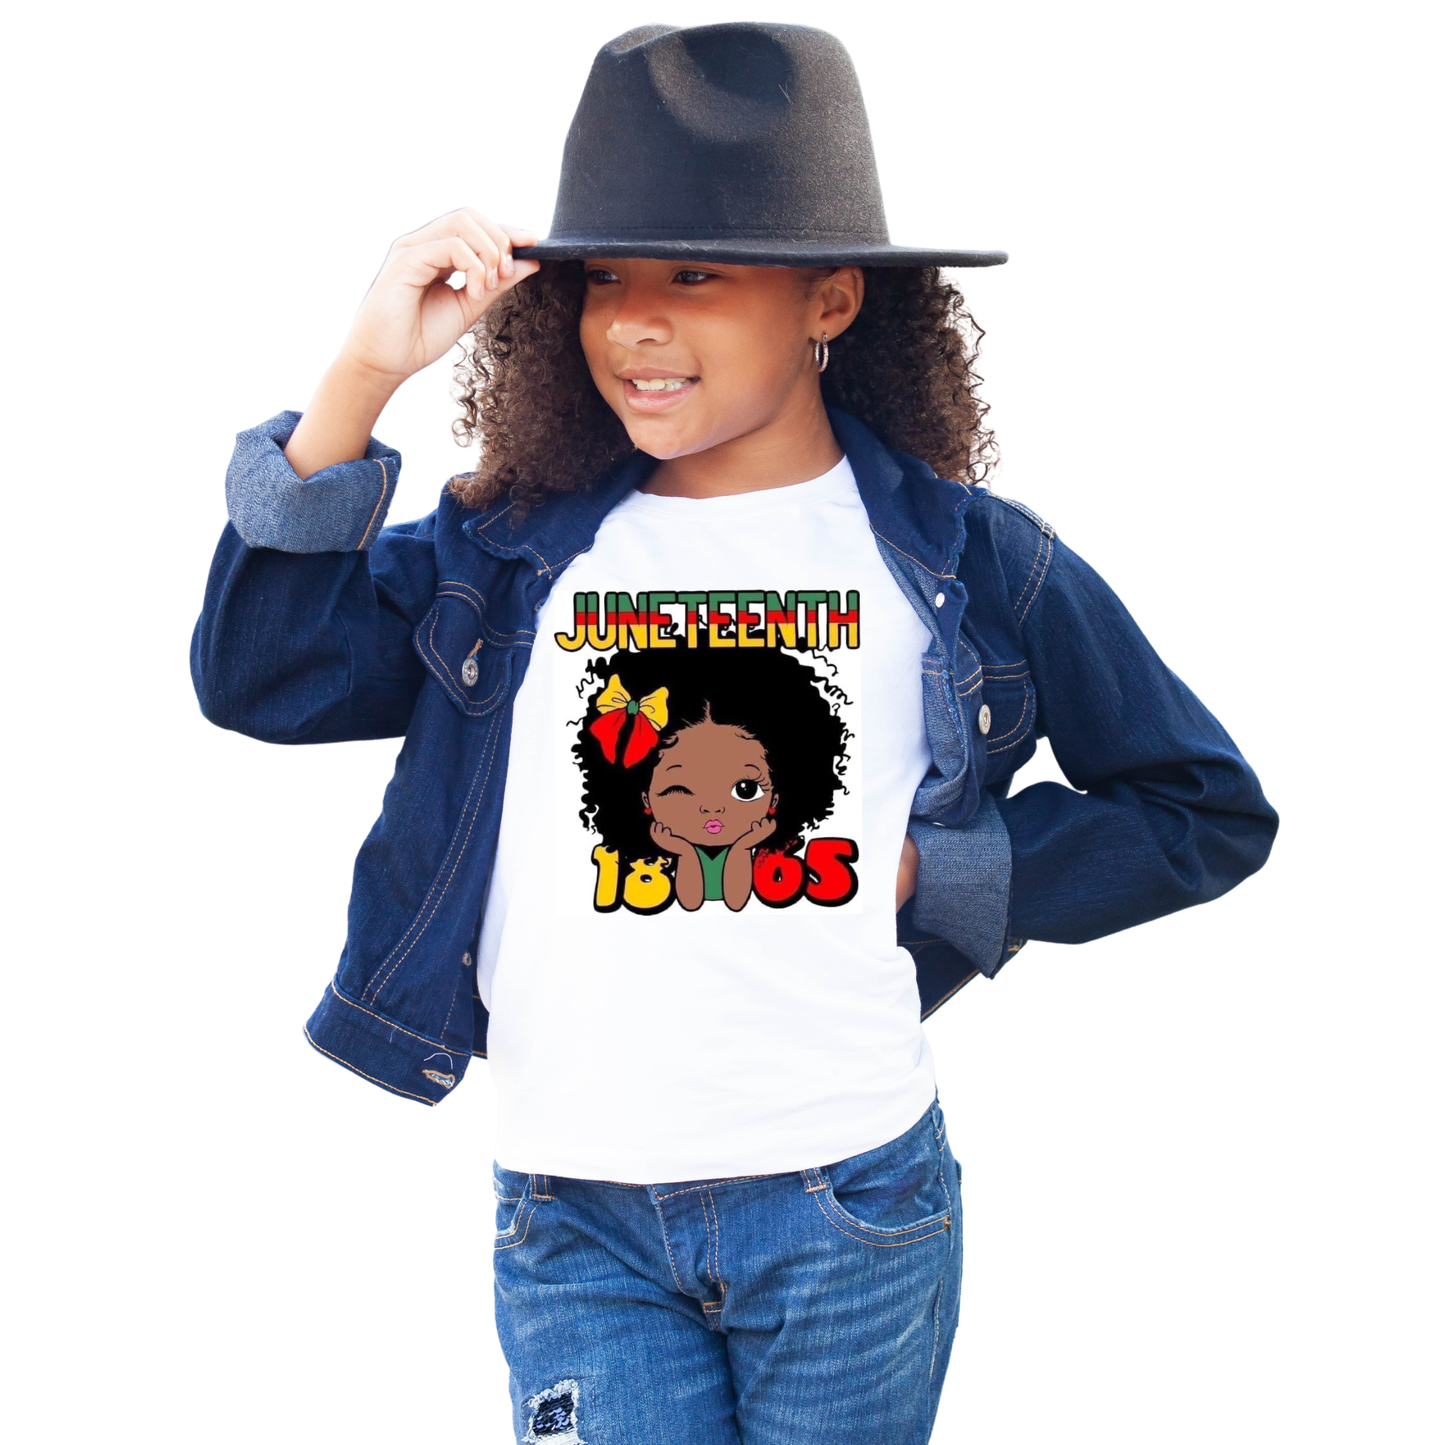 Little Miss Juneteenth 1865 Toddler and Youth Tshirt